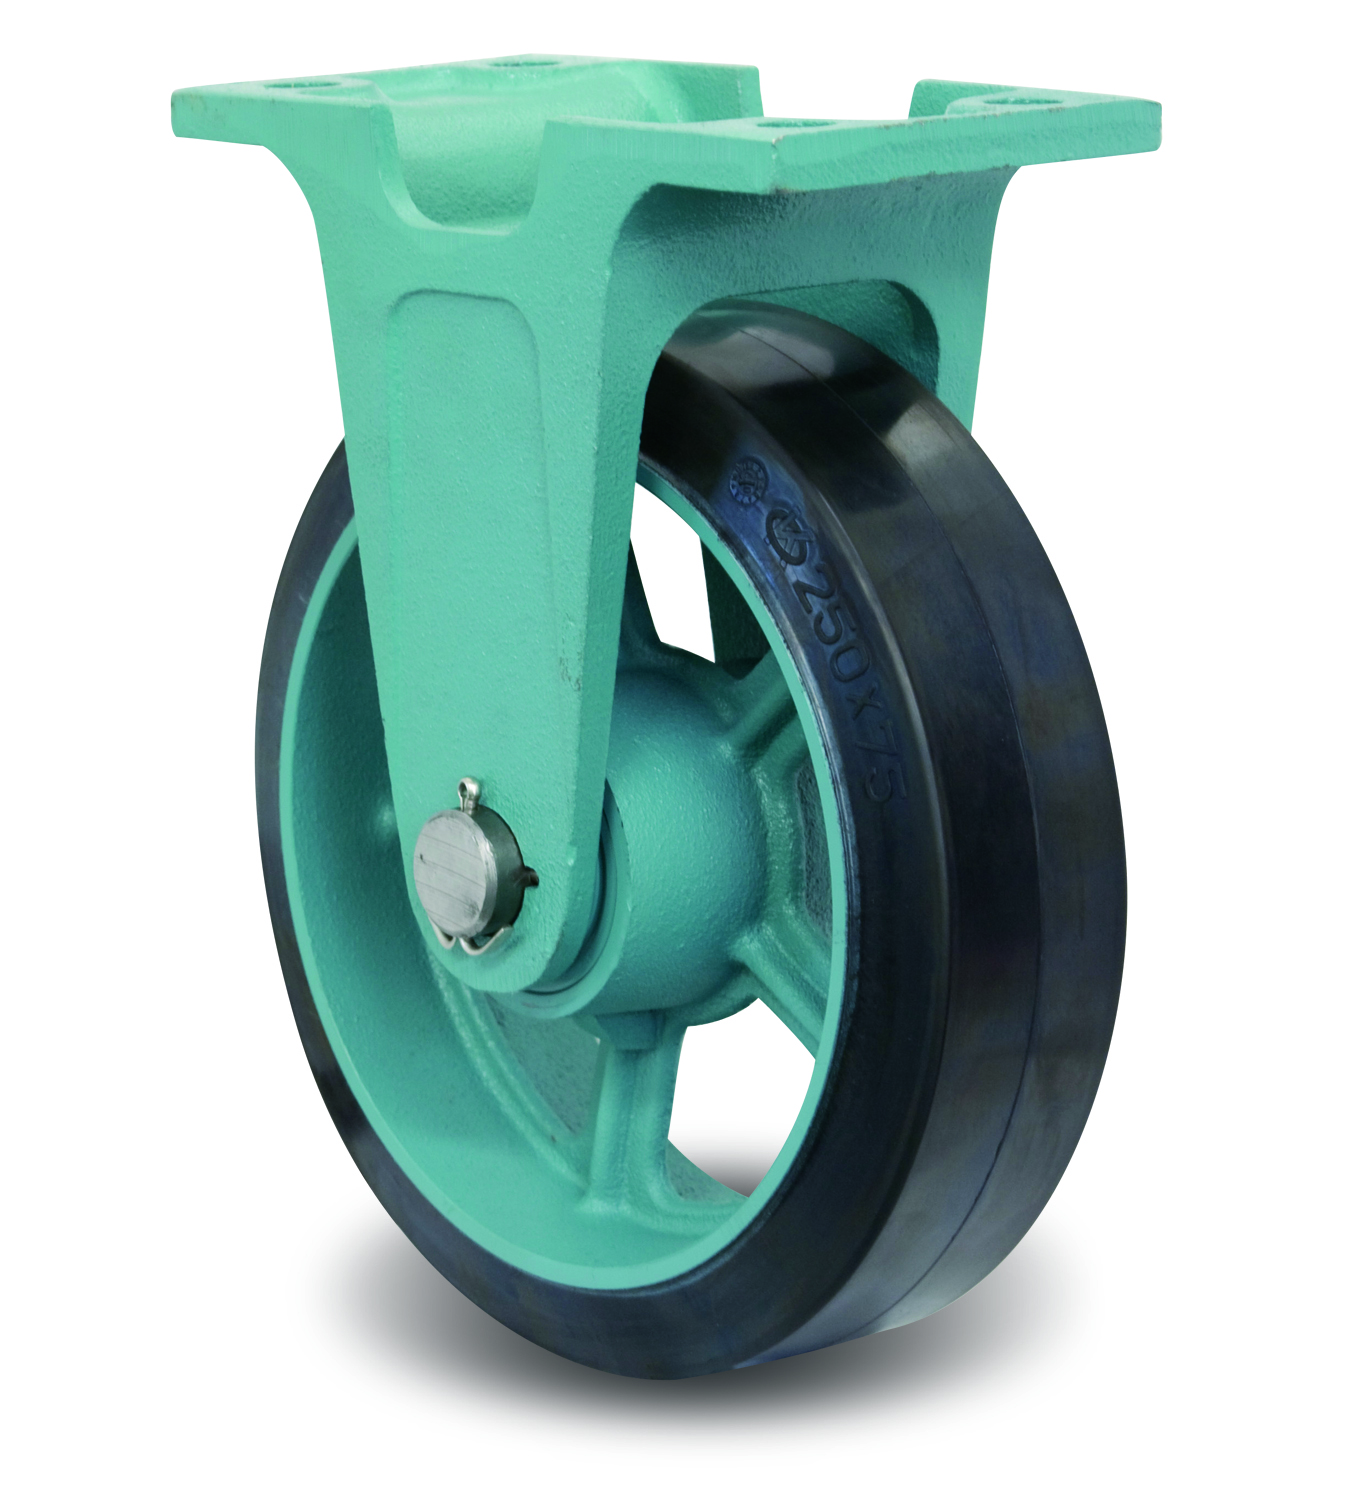 Ductile Caster Wide Type, Fixed MG-W Metal Fittings, E-MG-W (EMG-W150X75) 